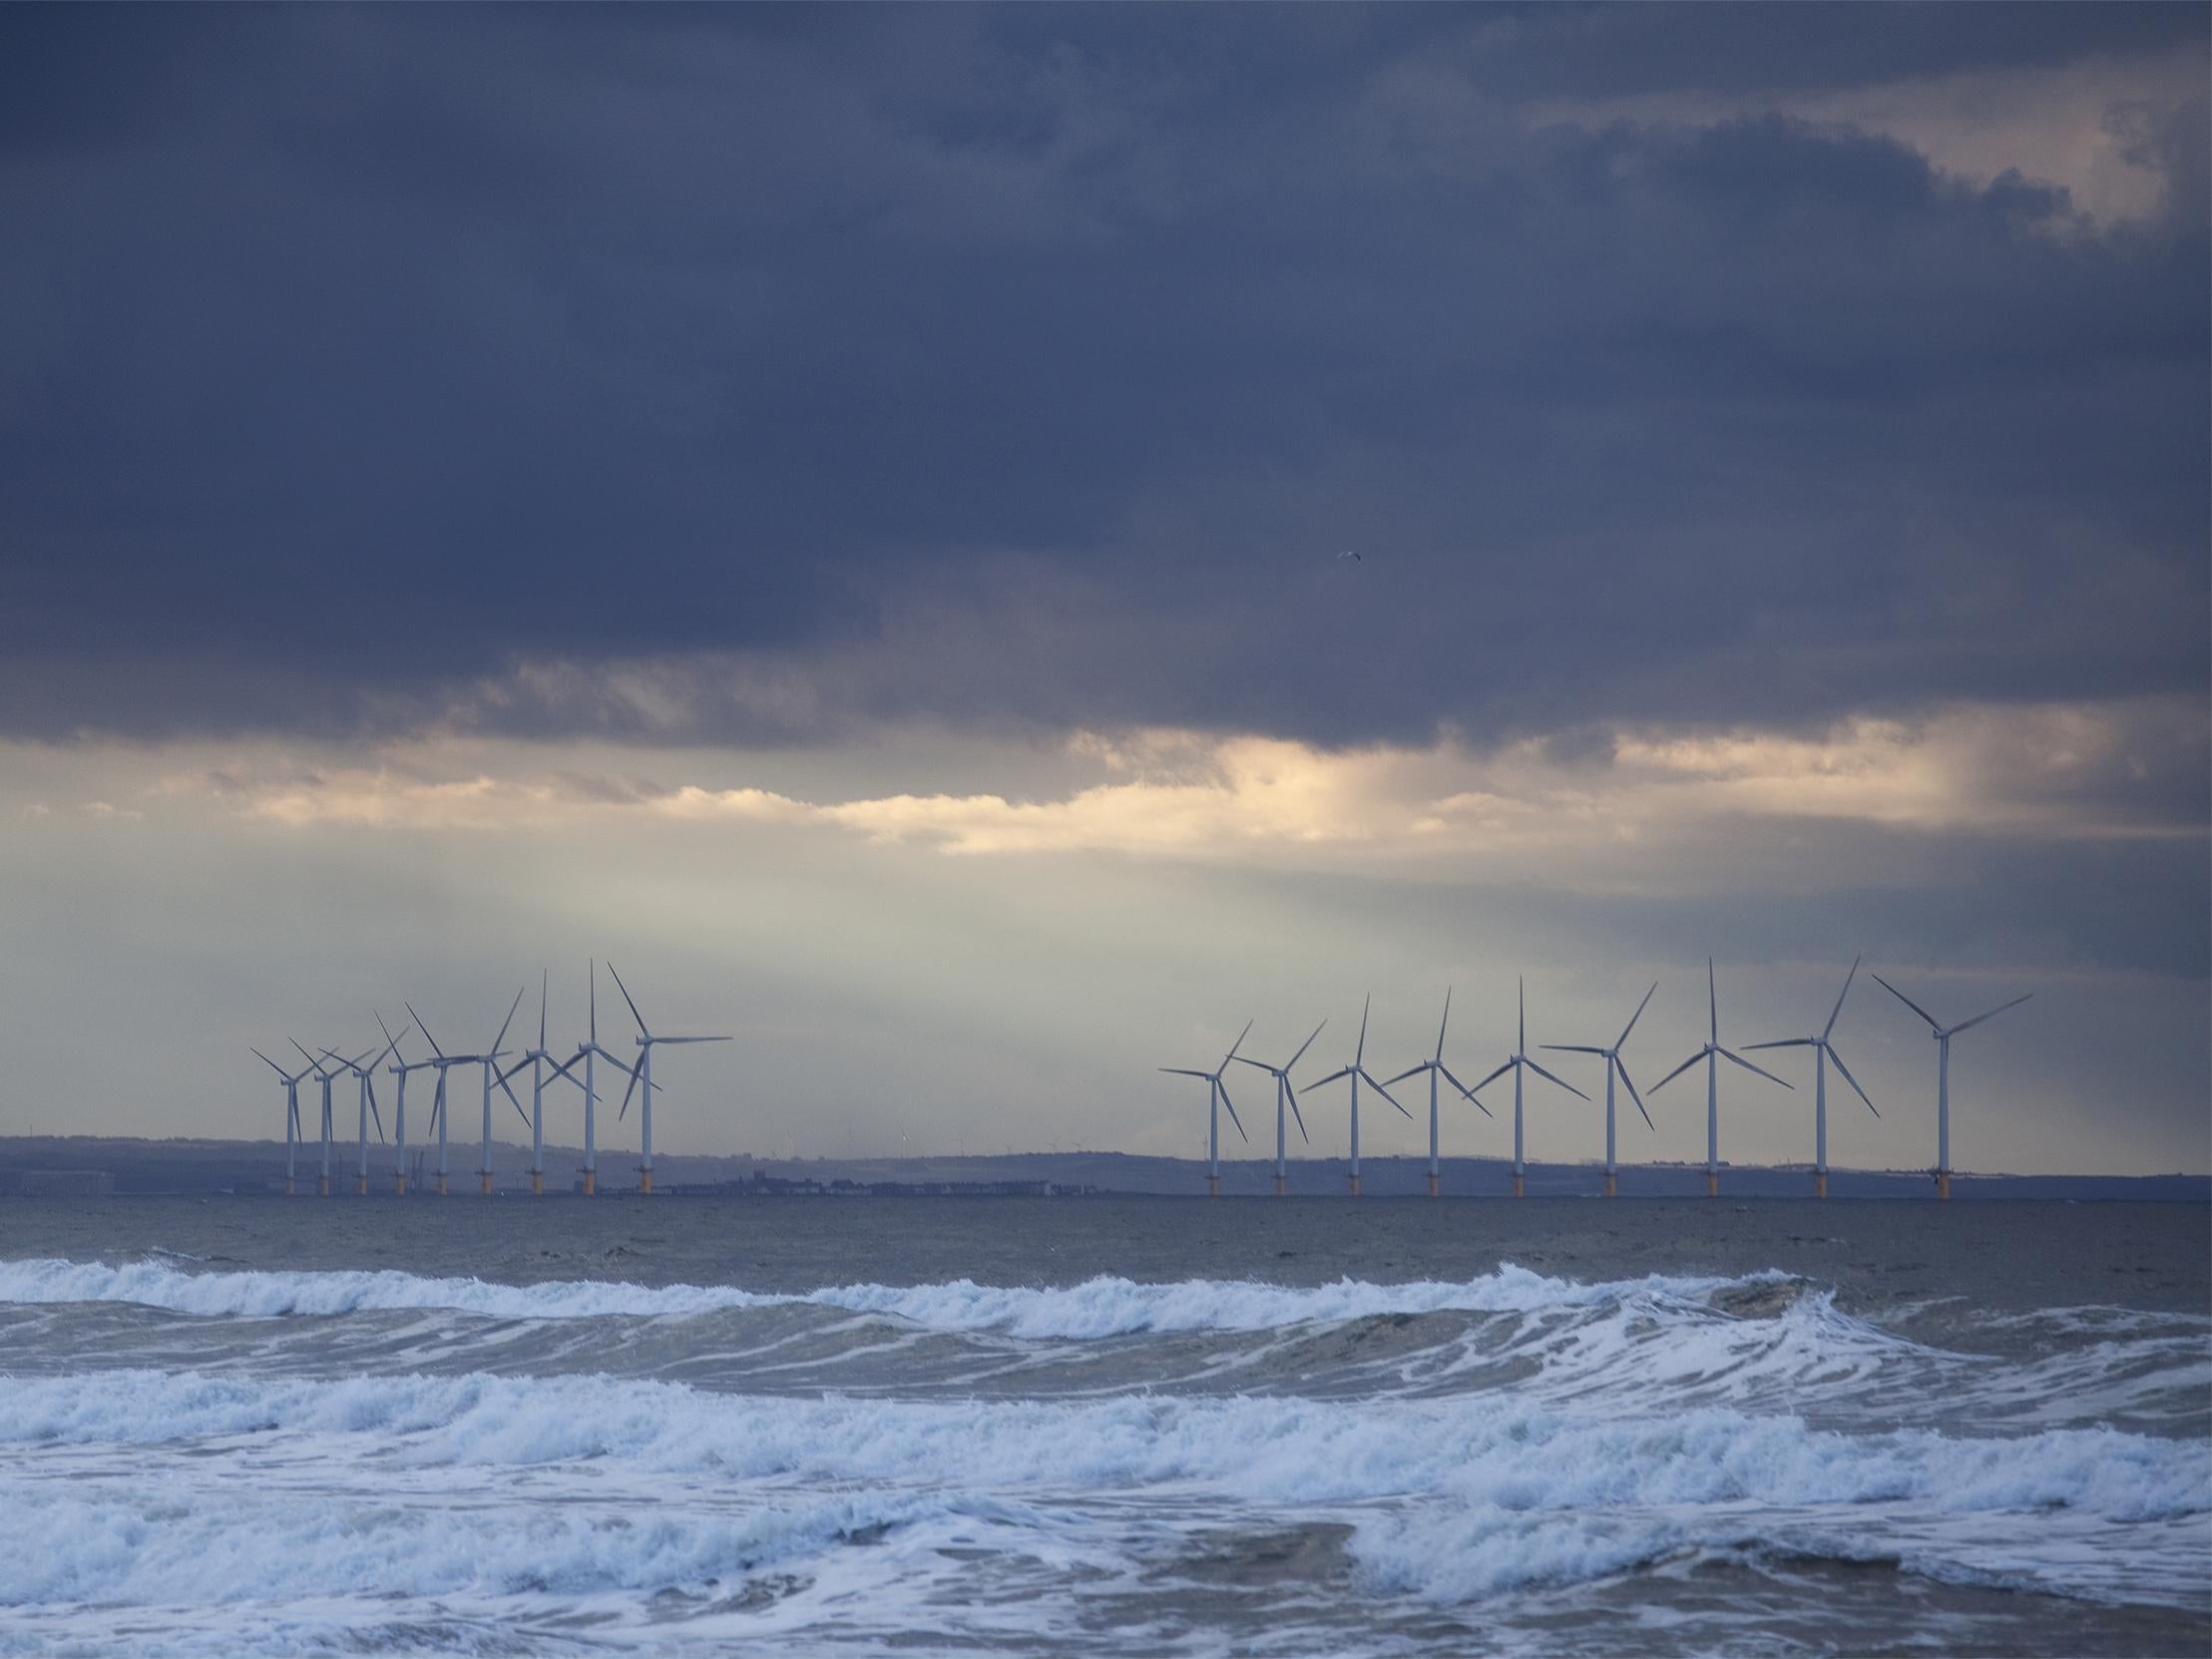 Scientists suggest wells drilled into North Sea rocks could act as stores for renewable energy produced by offshore wind farms